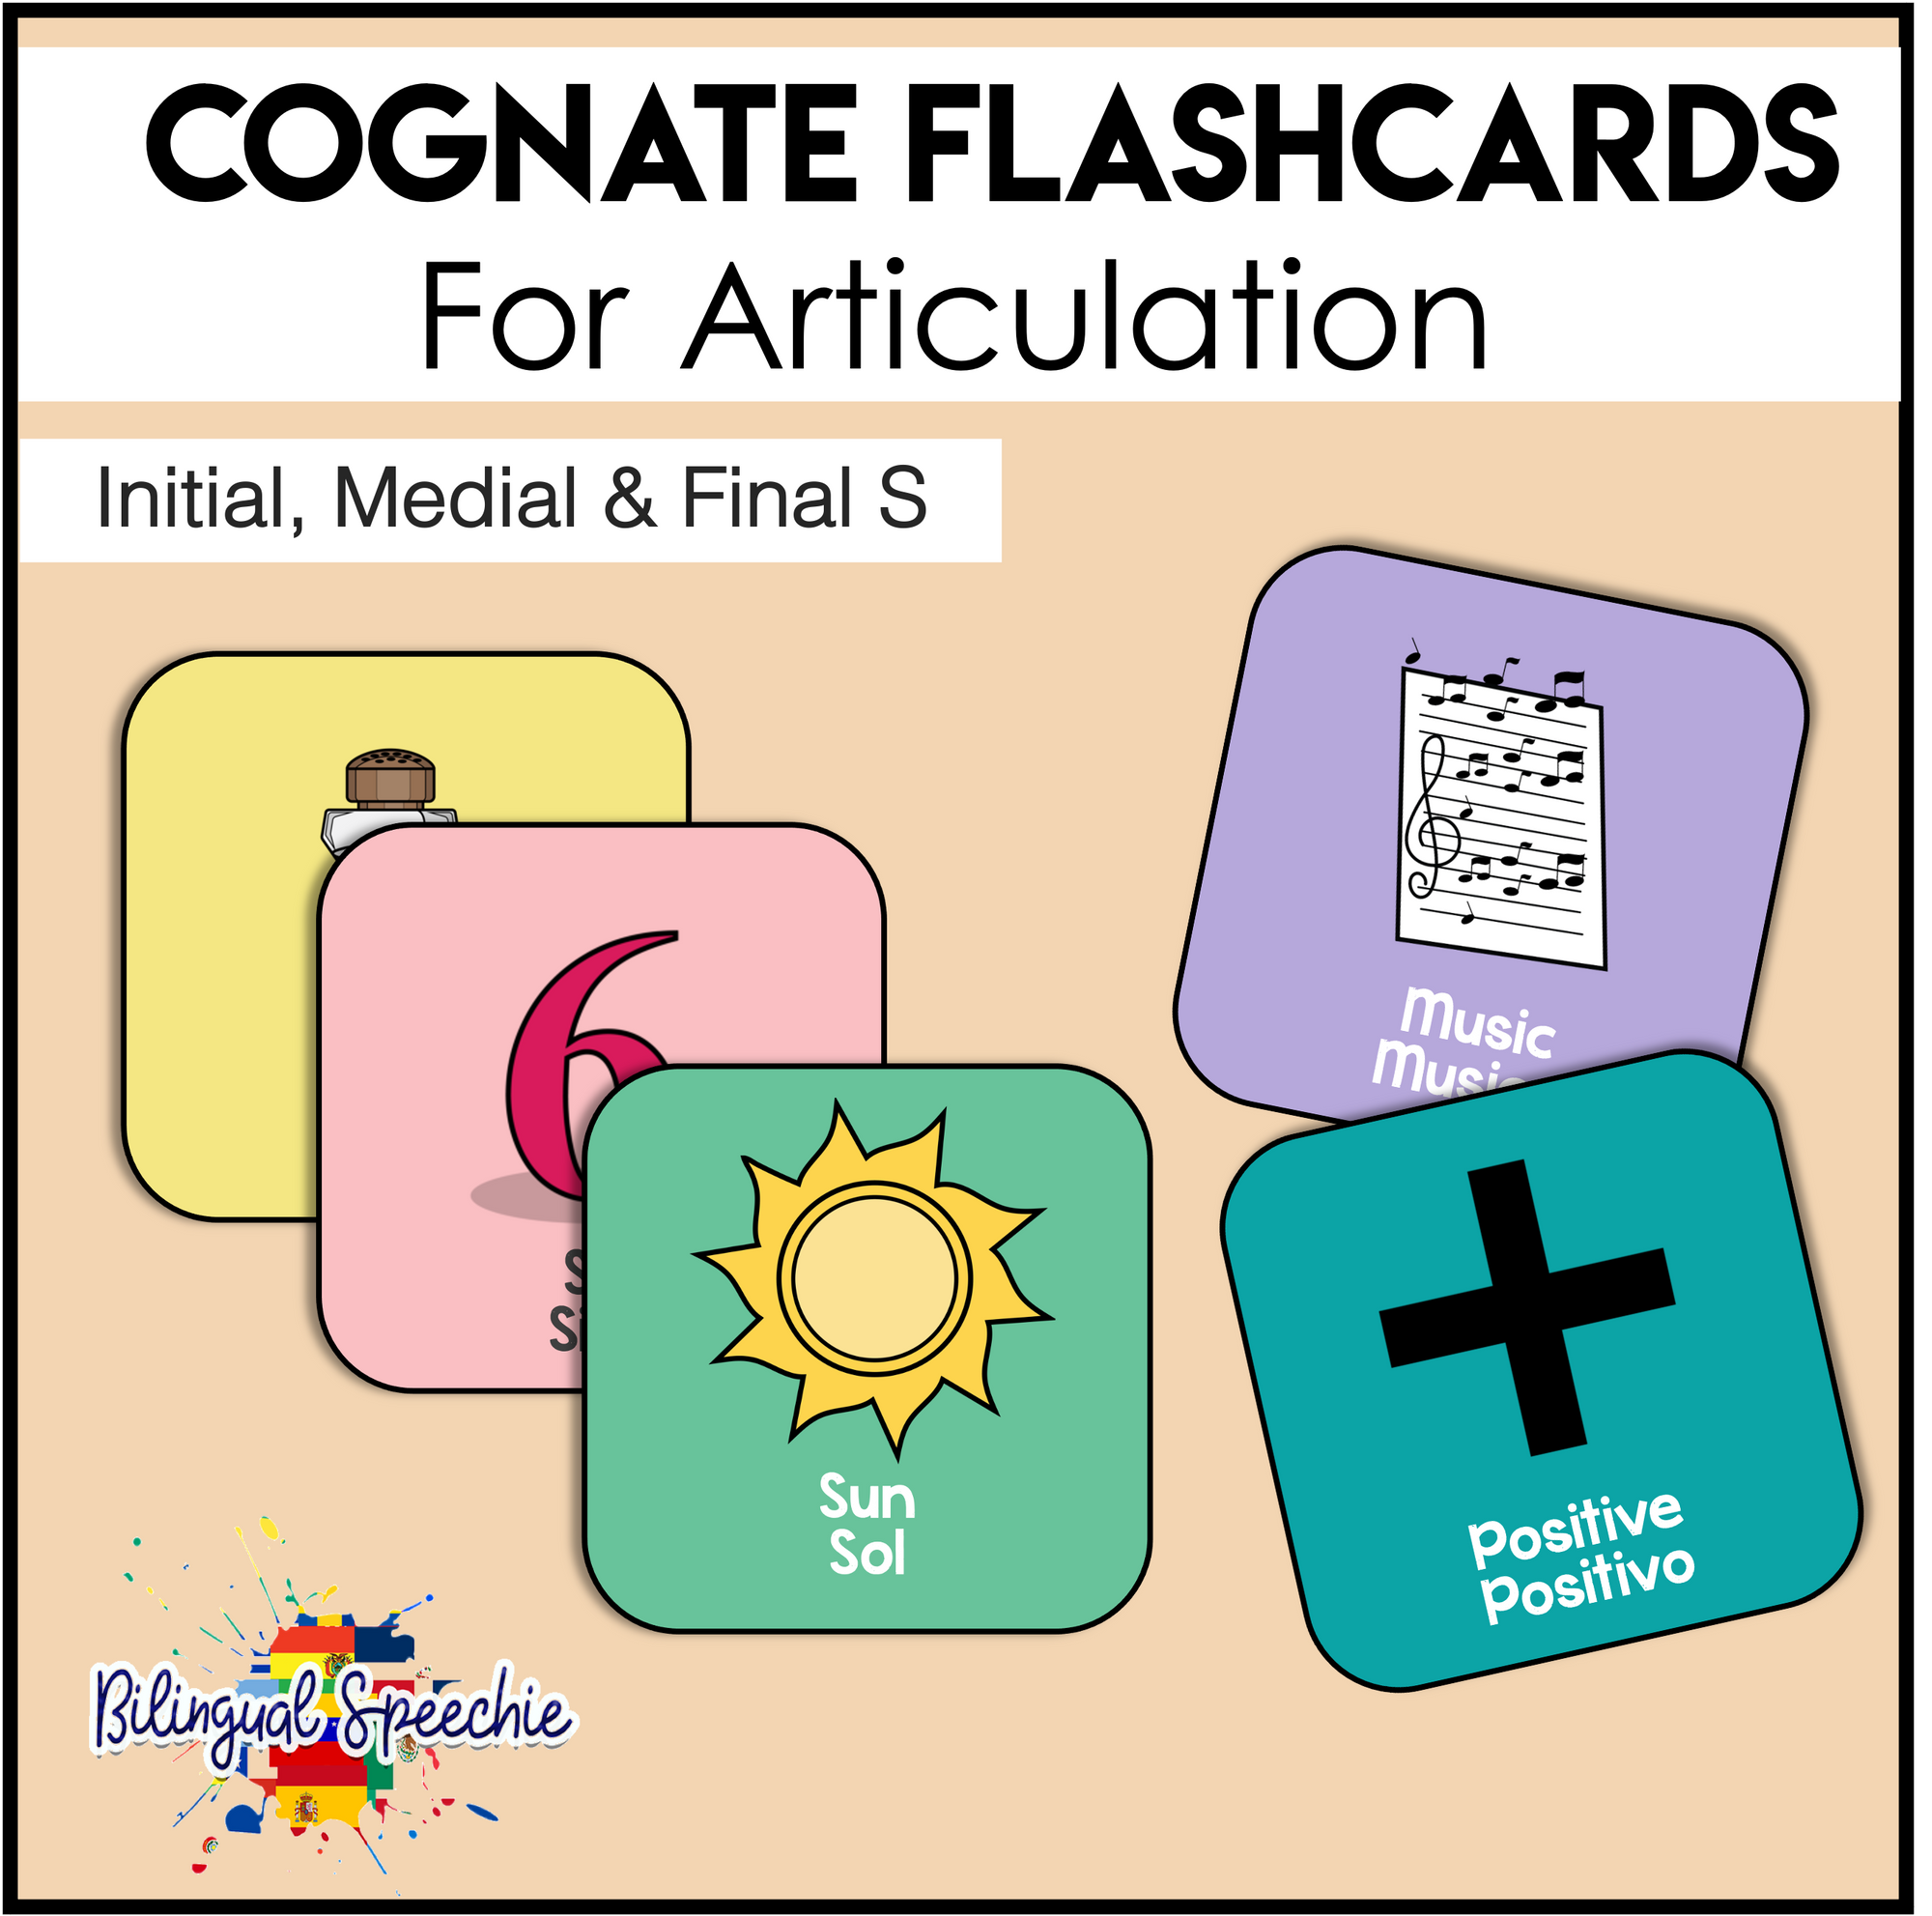 Flashcards for Initial, Medial & Final S